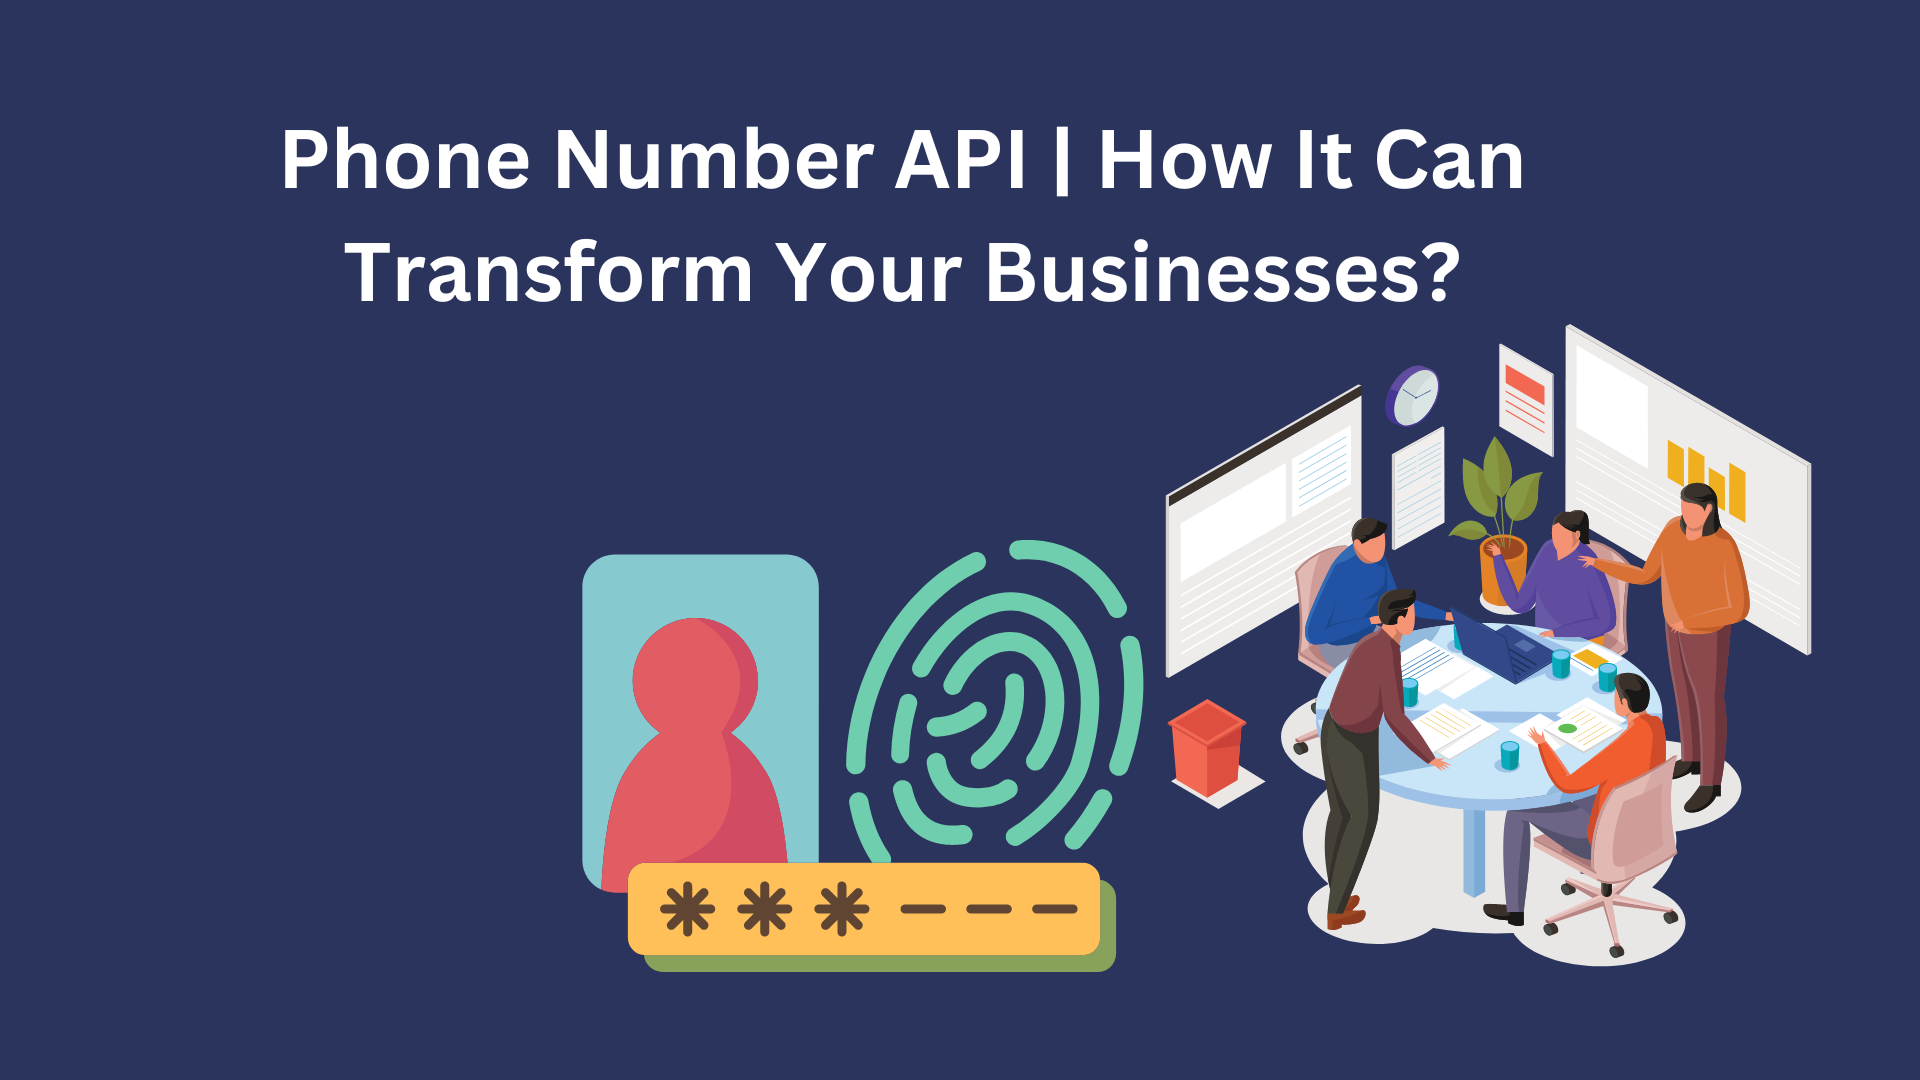 Phone Number API | How It Can Transform Your Businesses?